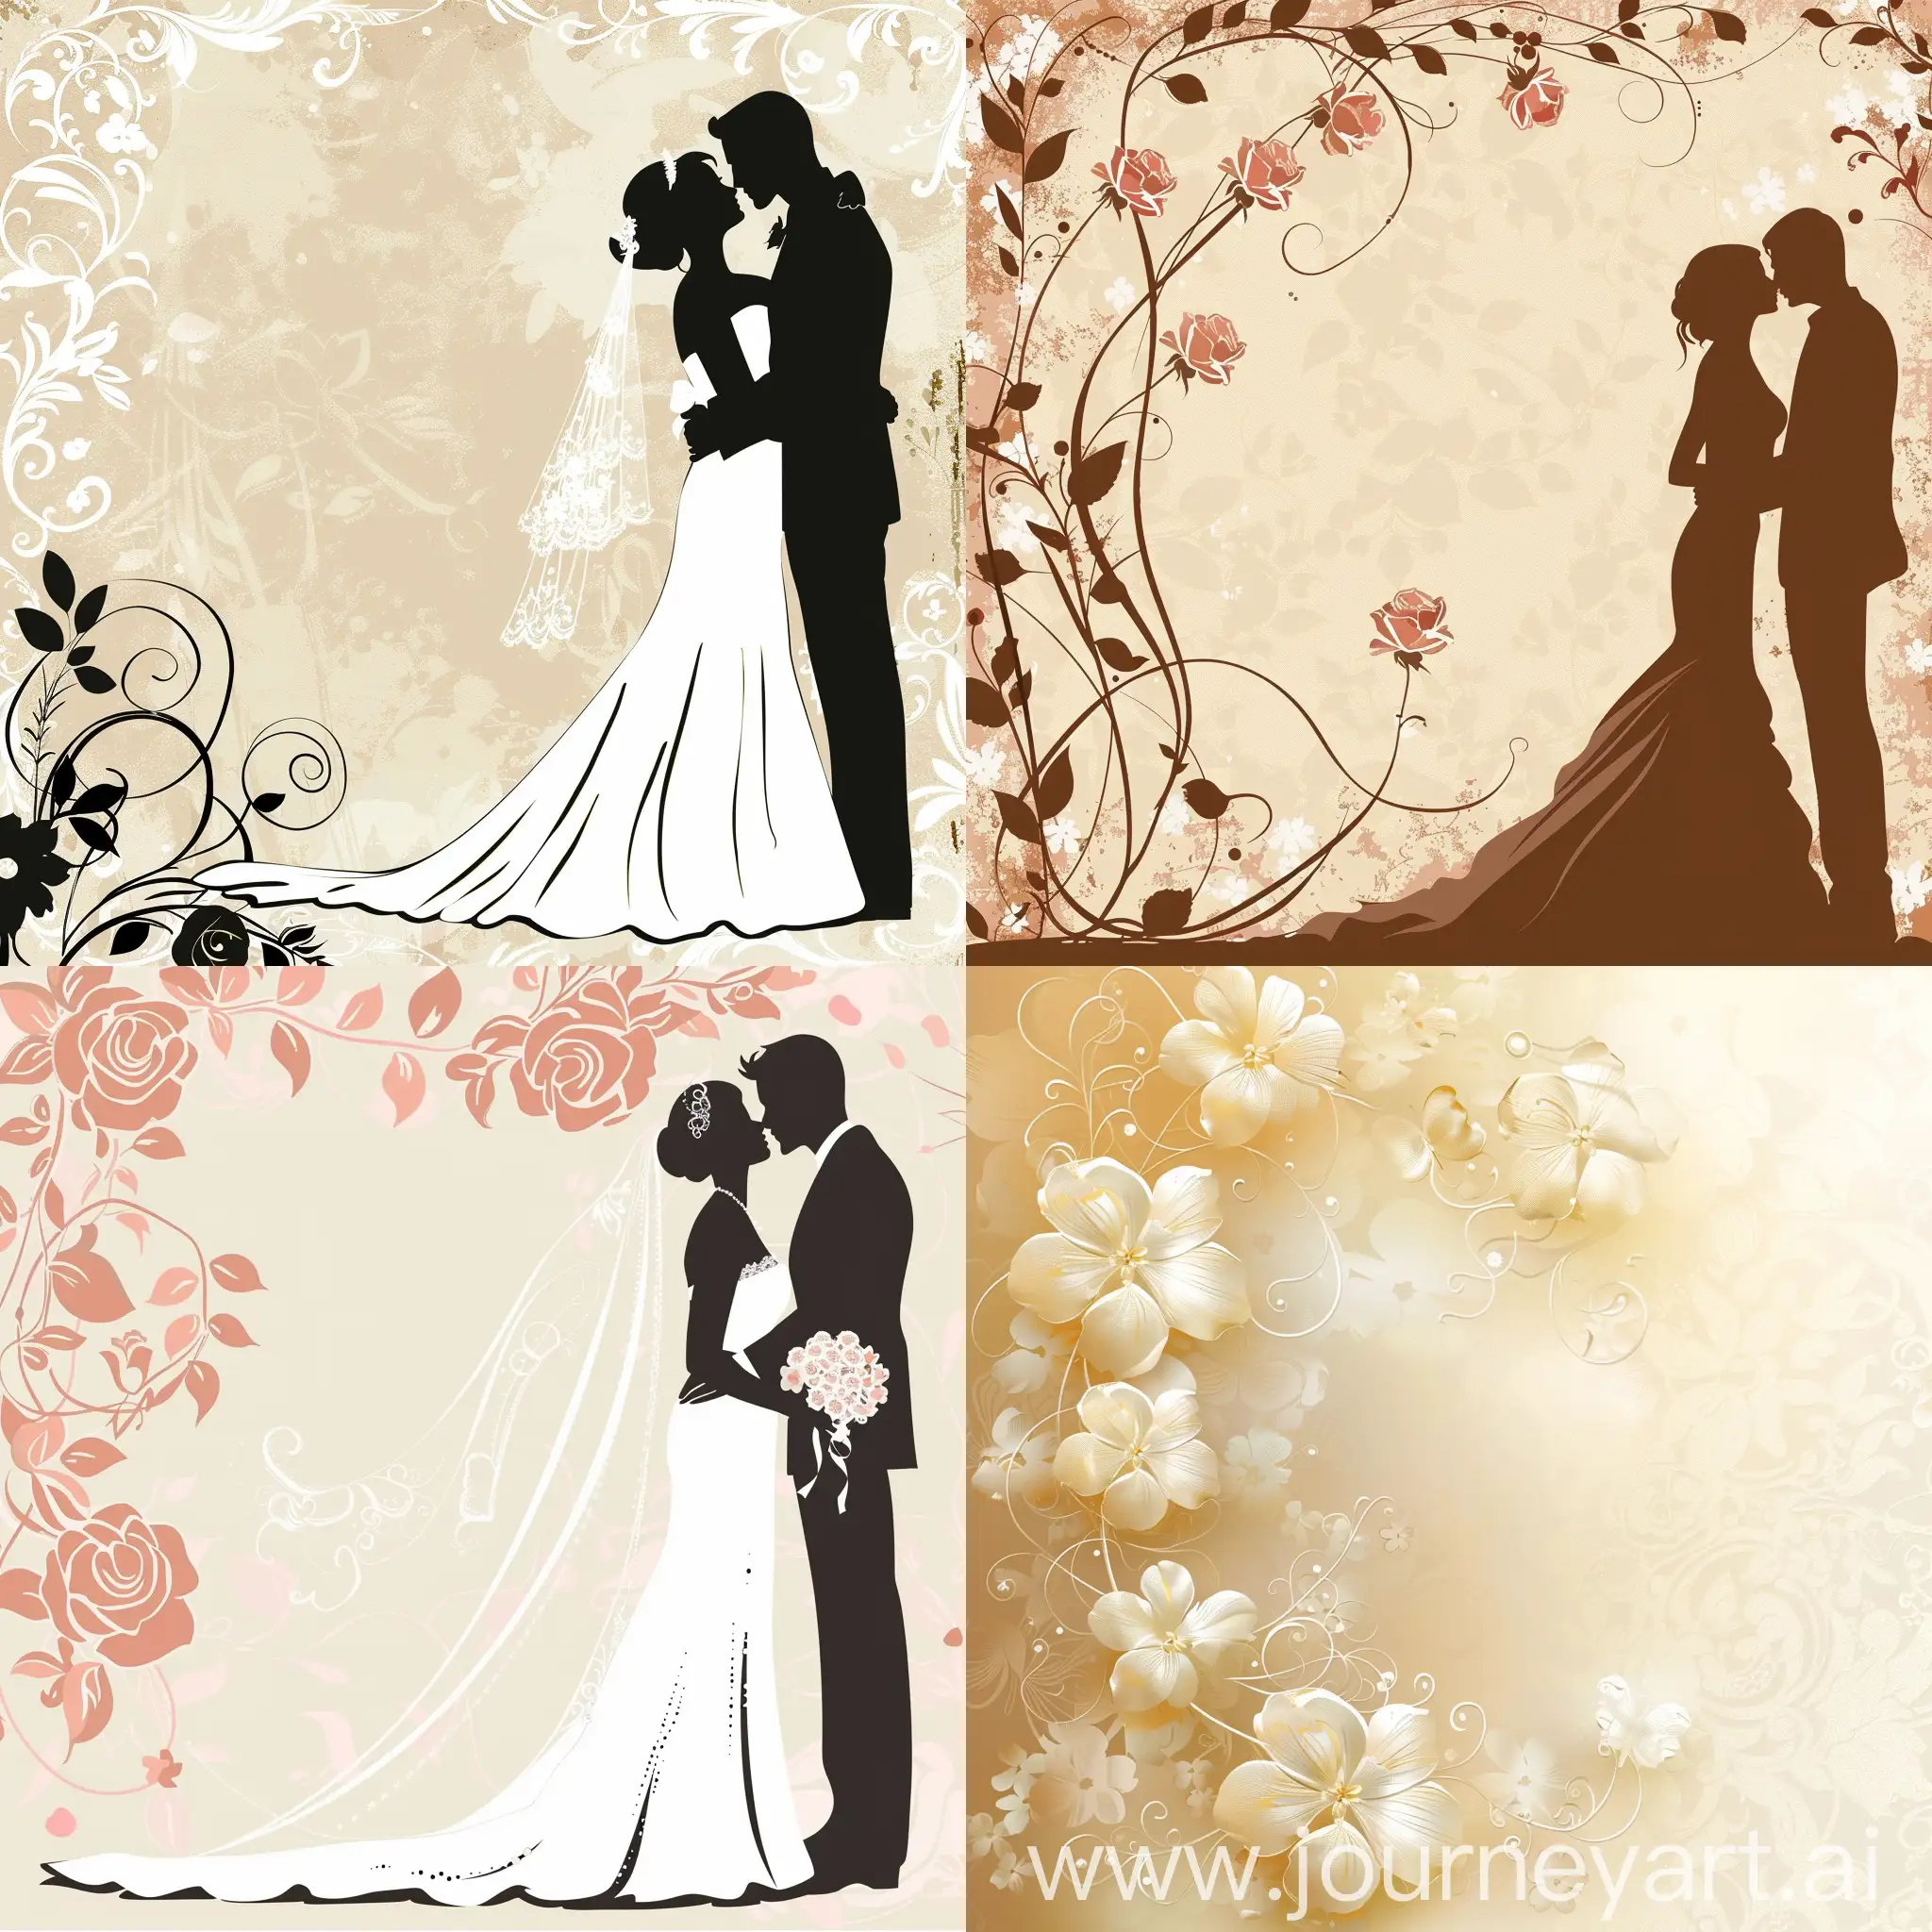 Romantic-Wedding-Card-with-Floral-Design